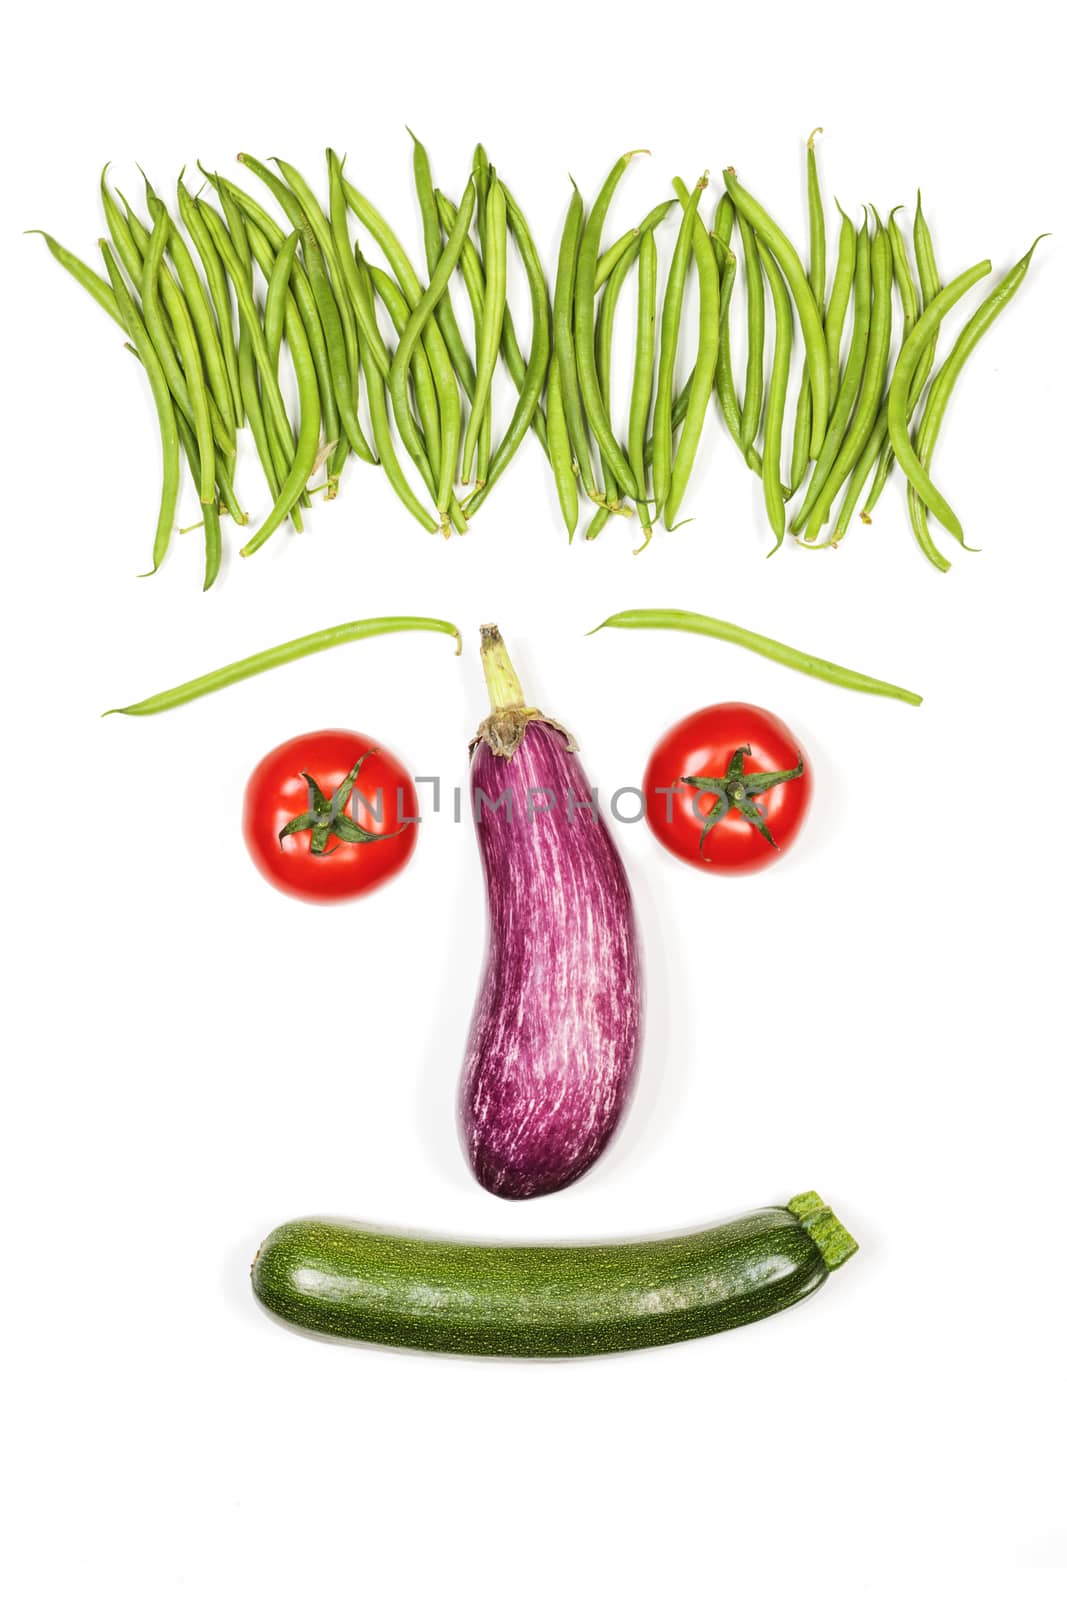 vegetables face by vwalakte